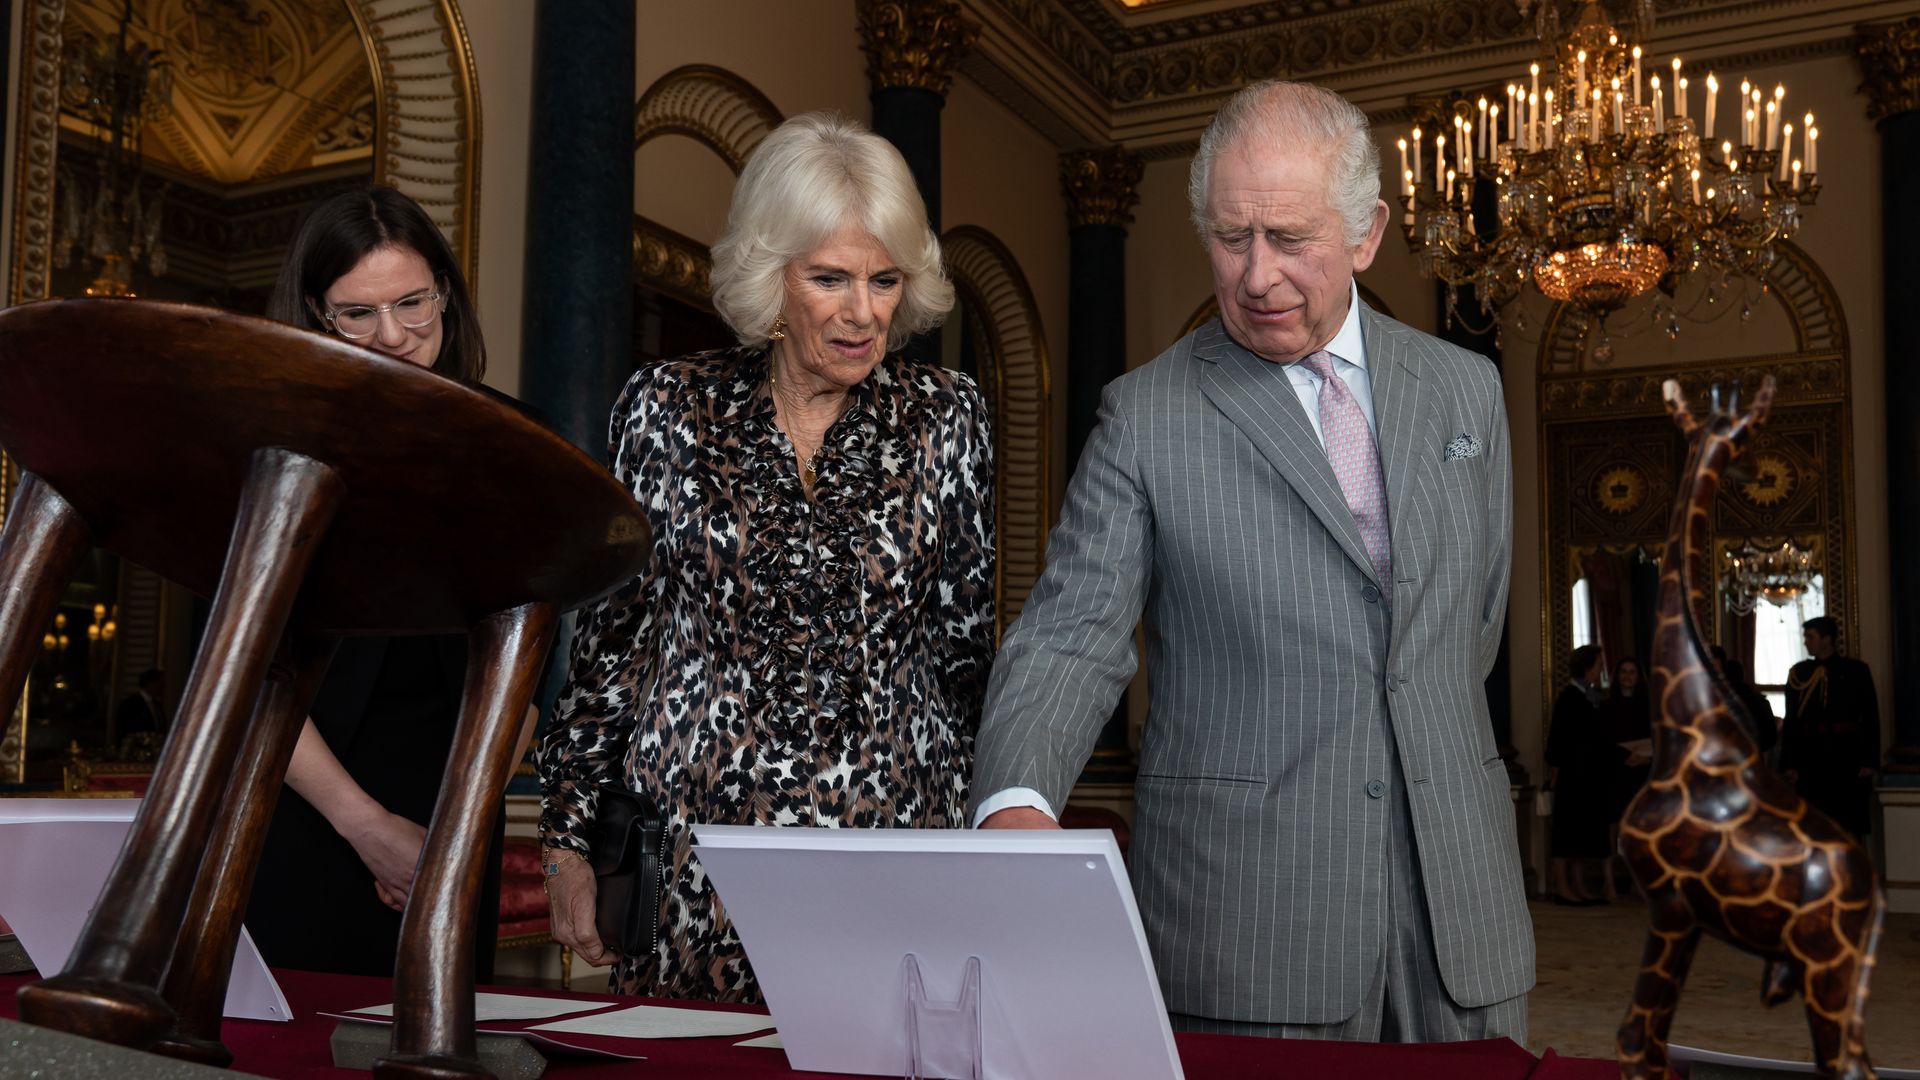 King Charles and Queen Camilla viewed a photograph of Treetops in Kenya